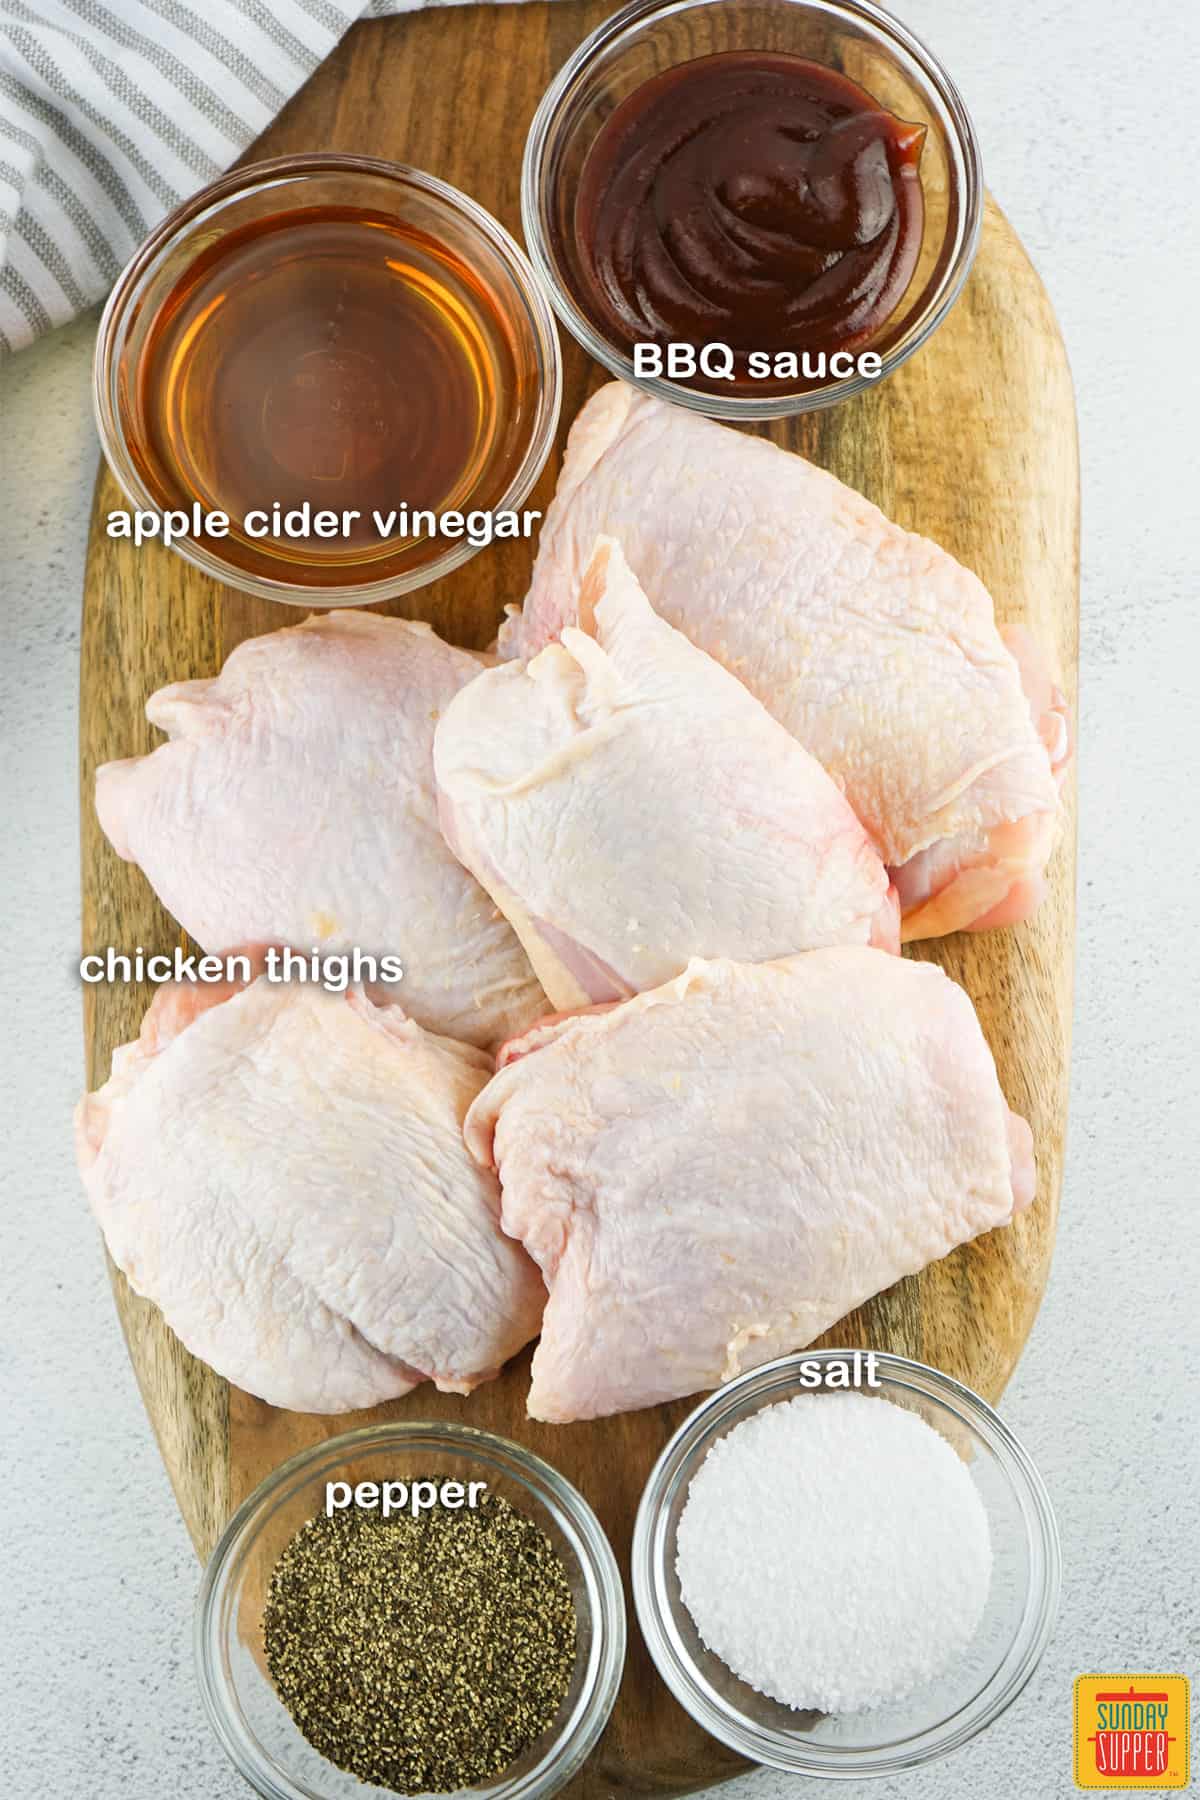 smoked chicken ingredients with labels for the ingredients